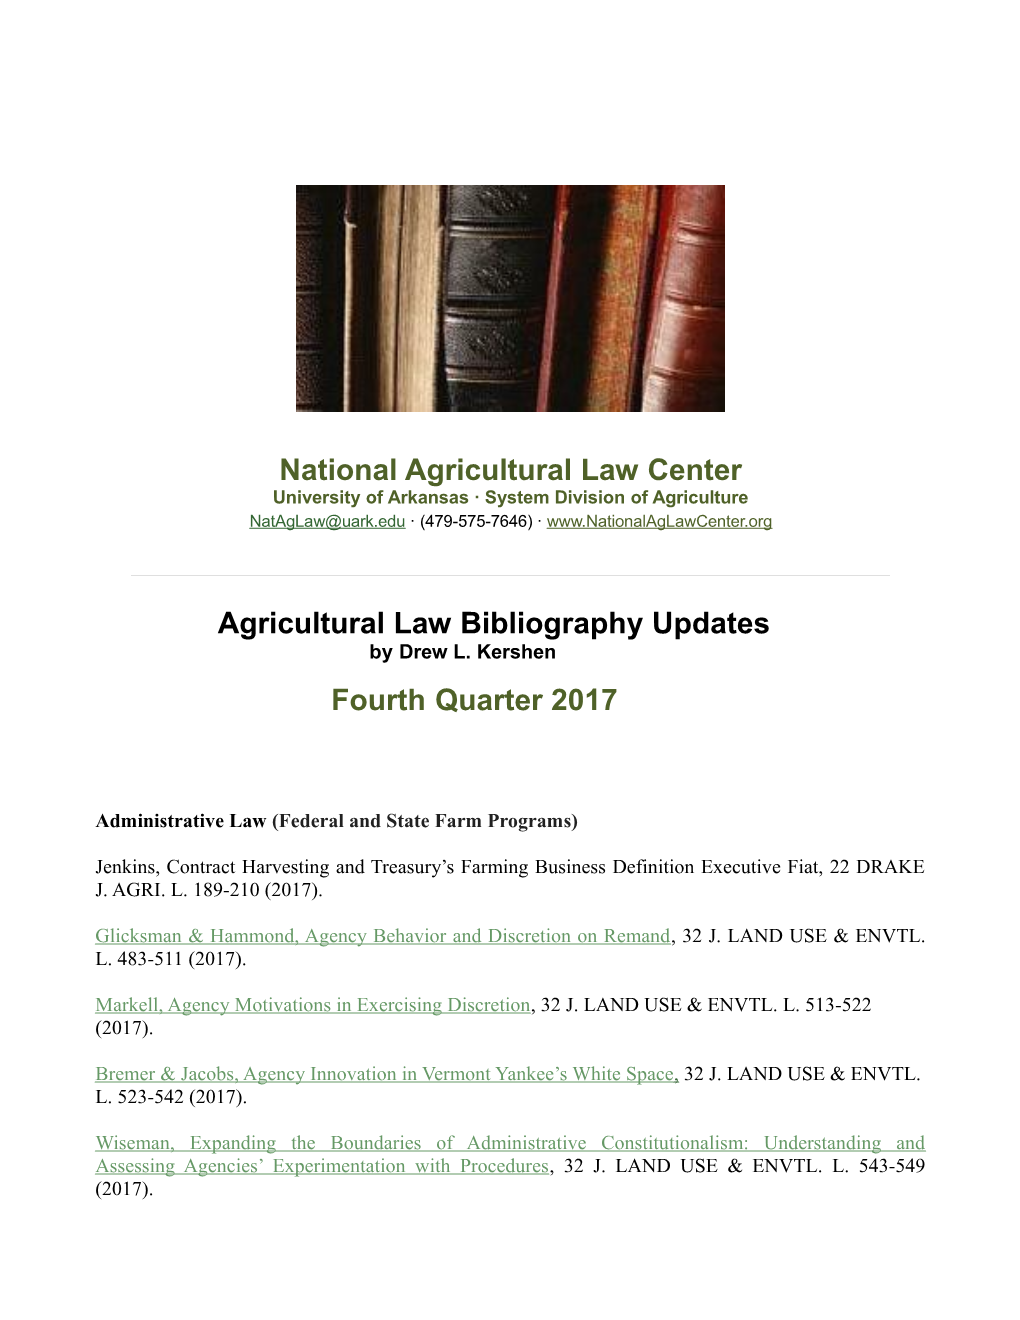 National Agricultural Law Center Agricultural Law Bibliography Updates Fourth Quarter 2017